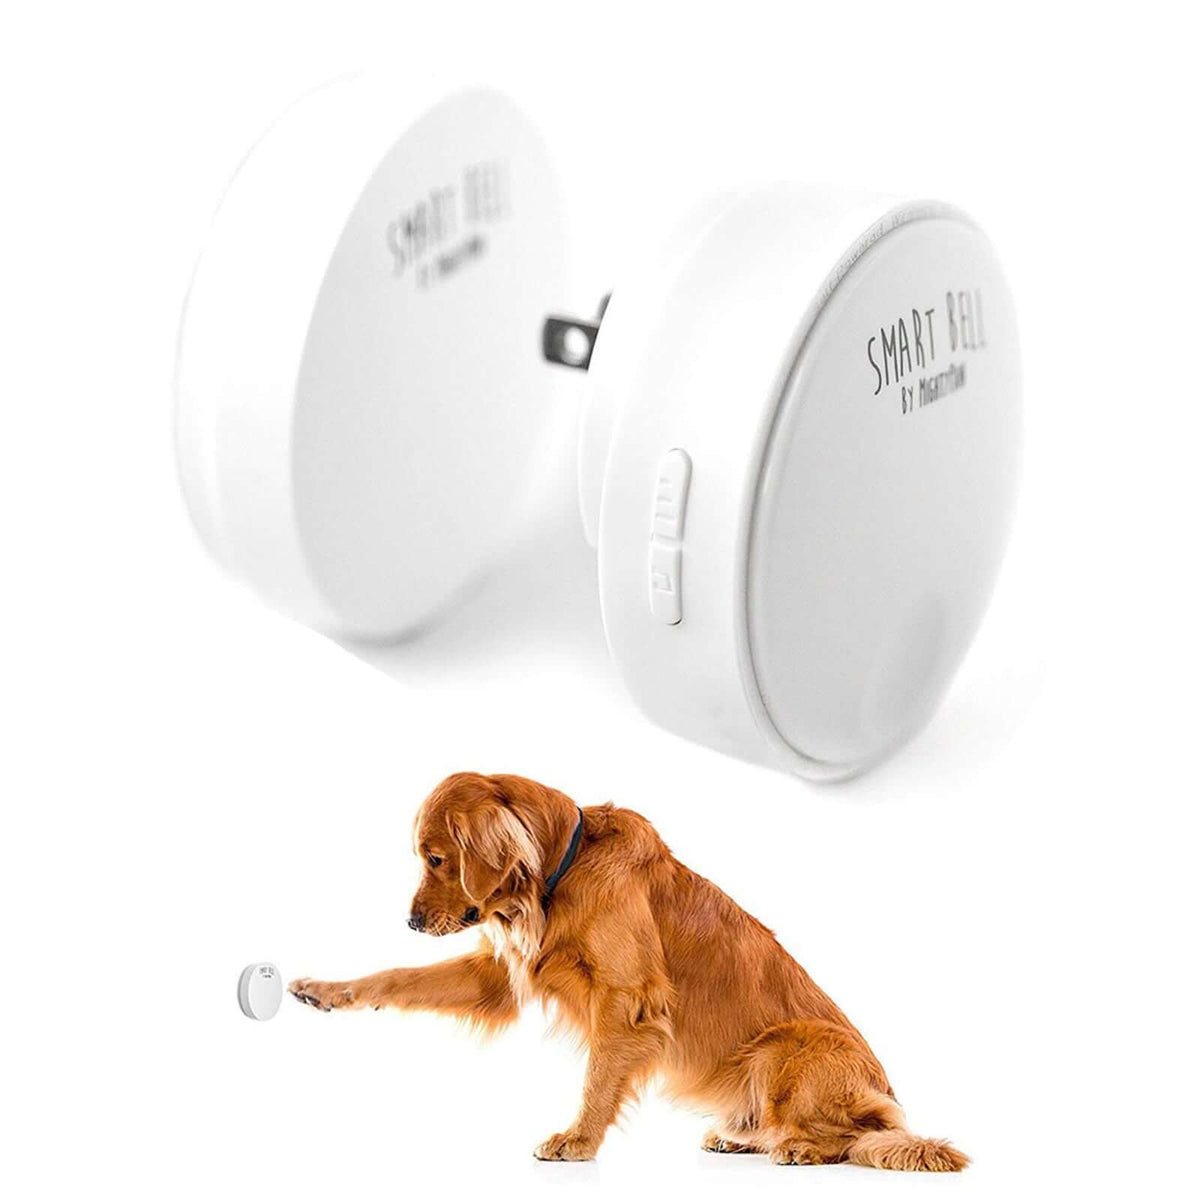 Automatic Pet Feeder - Four Paws Gear